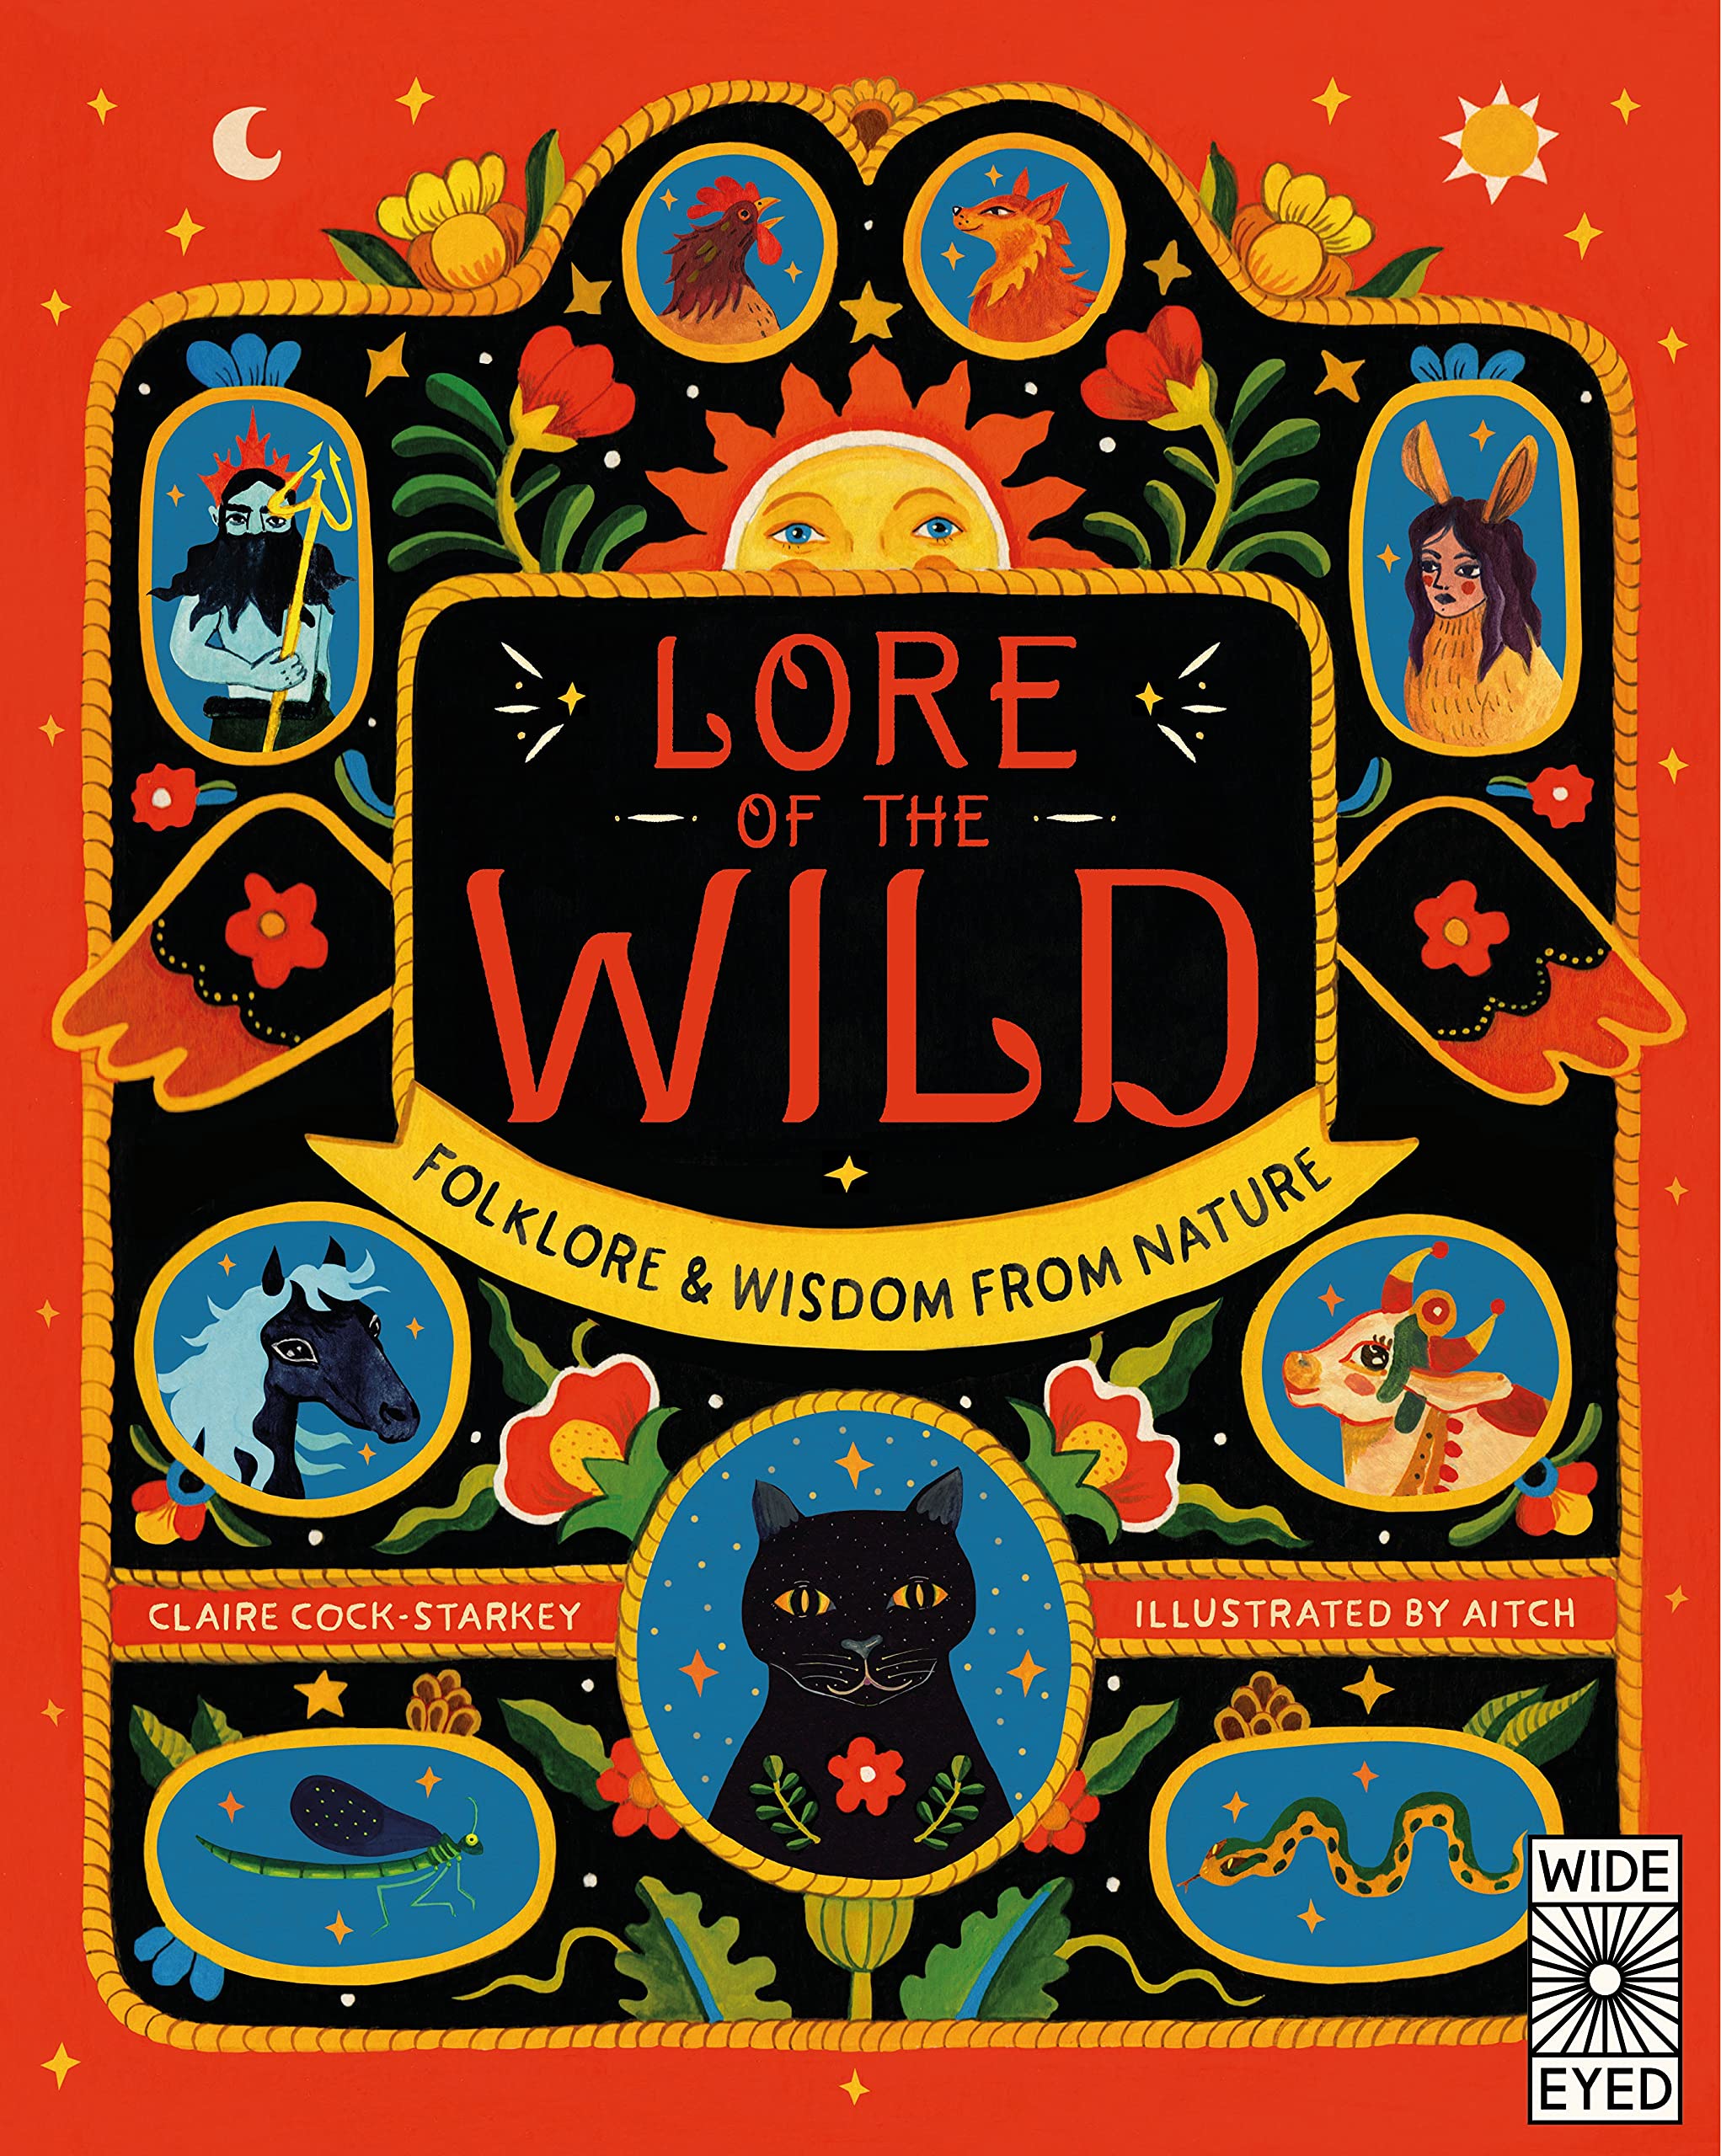 Lore of the Wild: Folktales and Wisdom from Nature | Claire Cock-Starkey